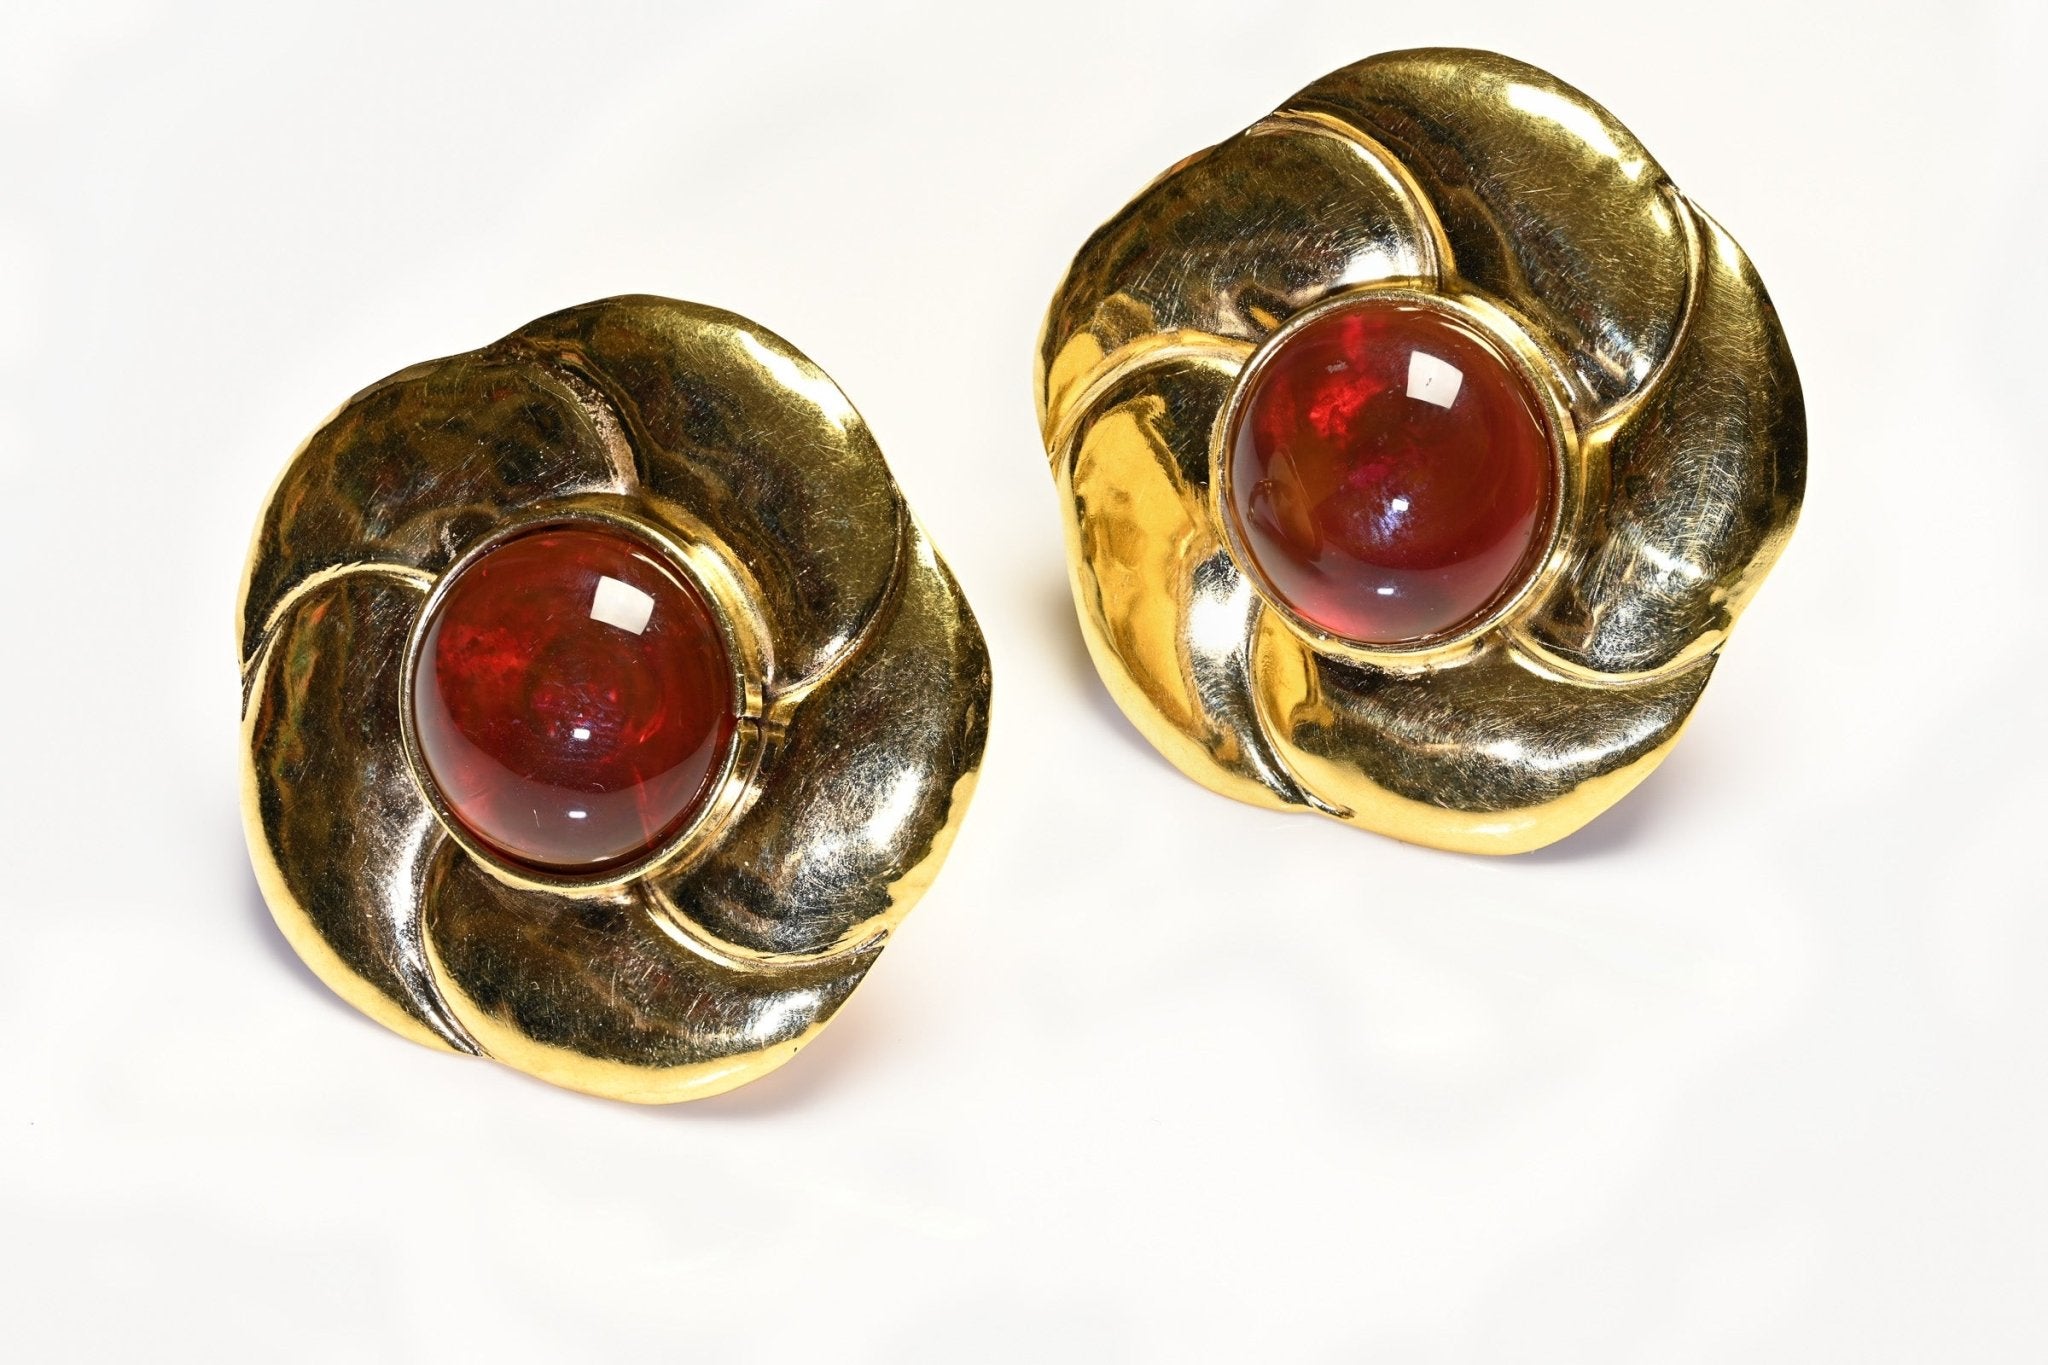 Frances Patiky Stein FPS 1980’s Gripoix Red Glass Flower Camellia Earrings - DSF Antique Jewelry